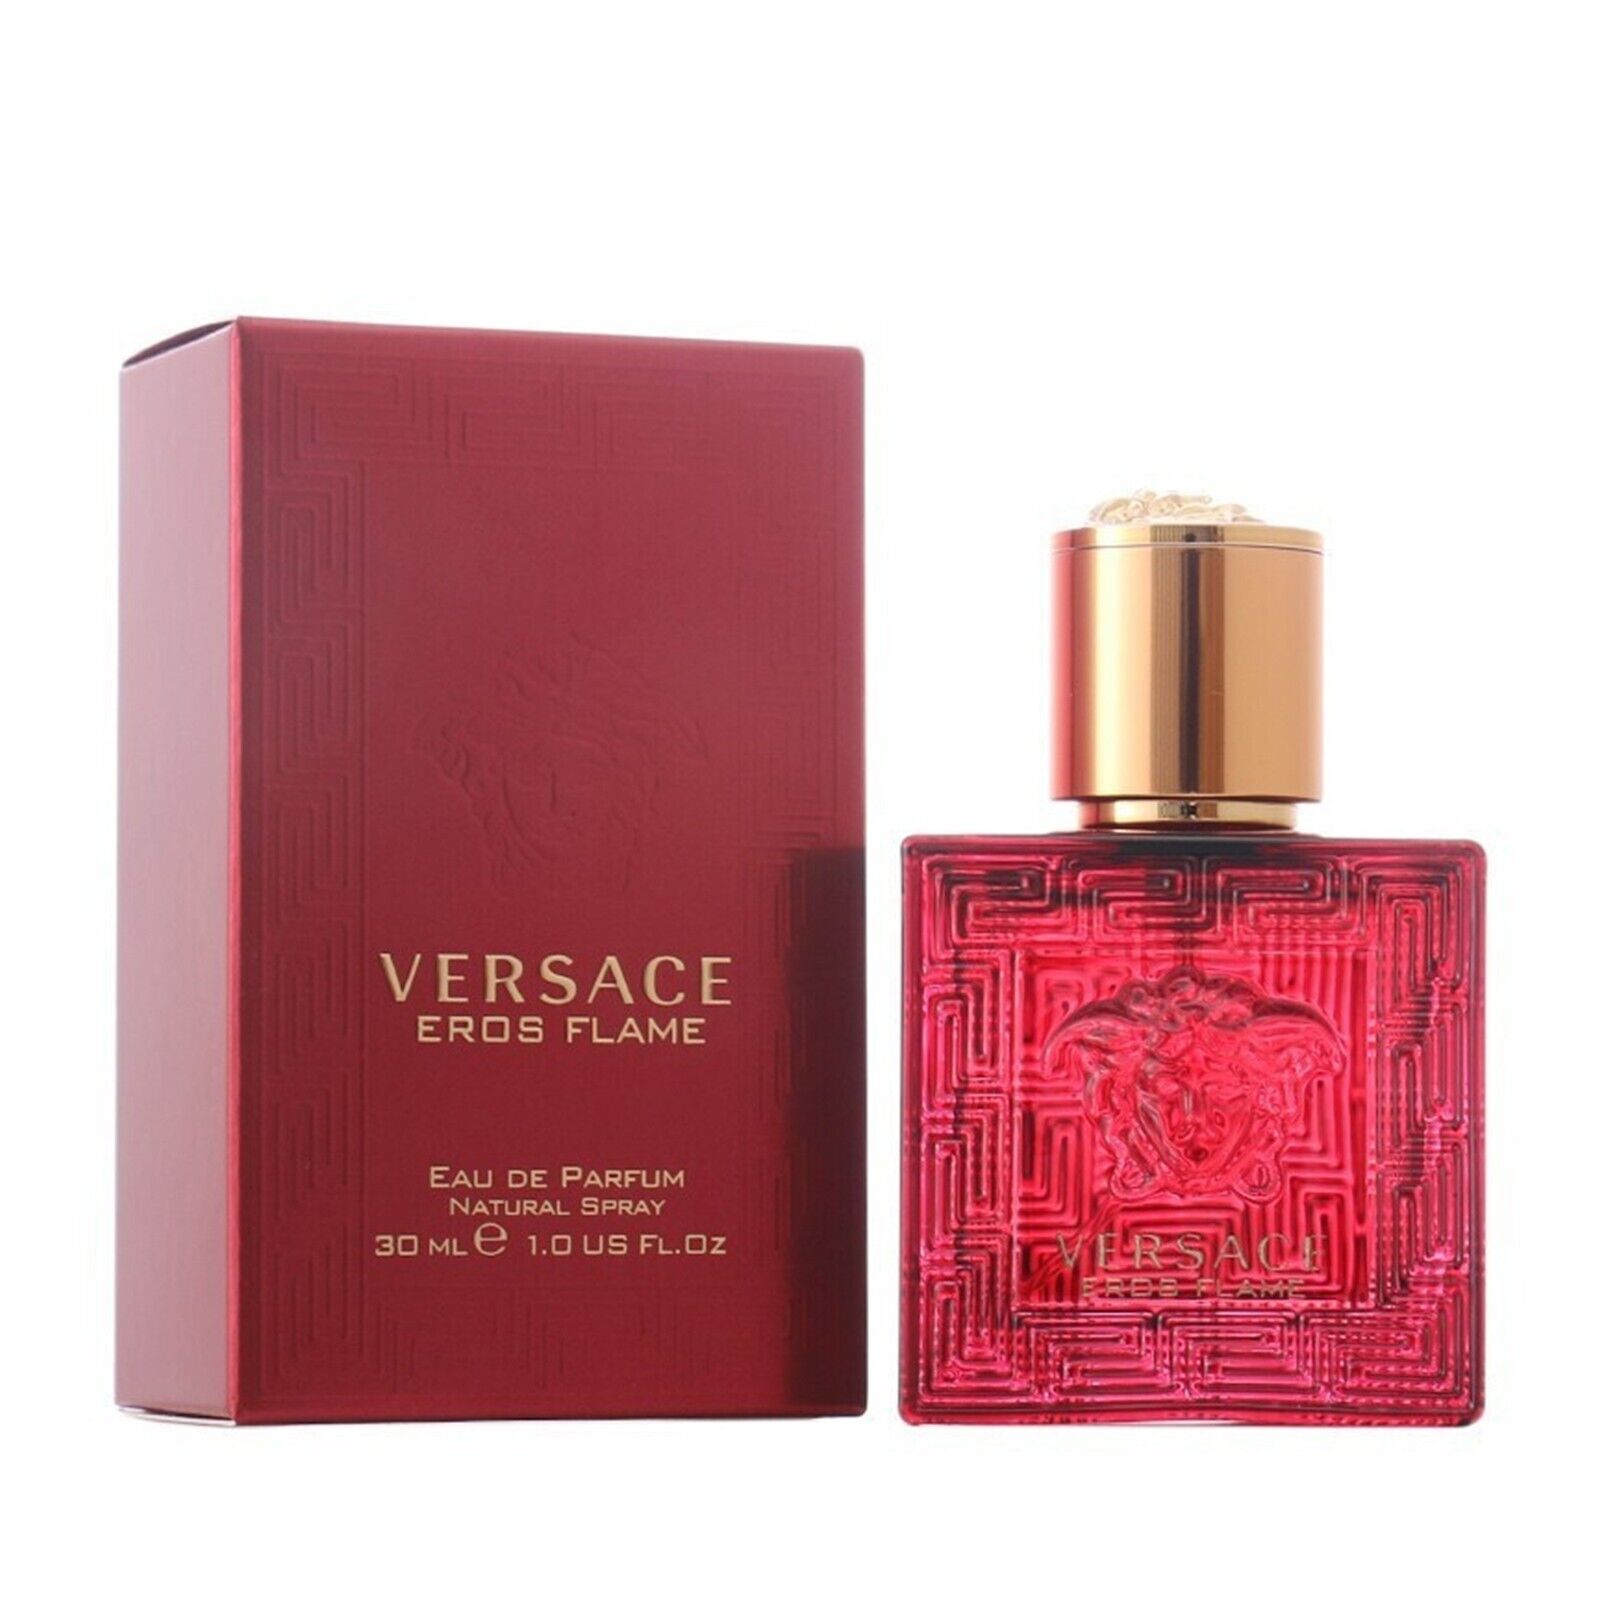 Versace Eros Flame by Versace 3.4 oz EDP Cologne for Men Spray New In Box